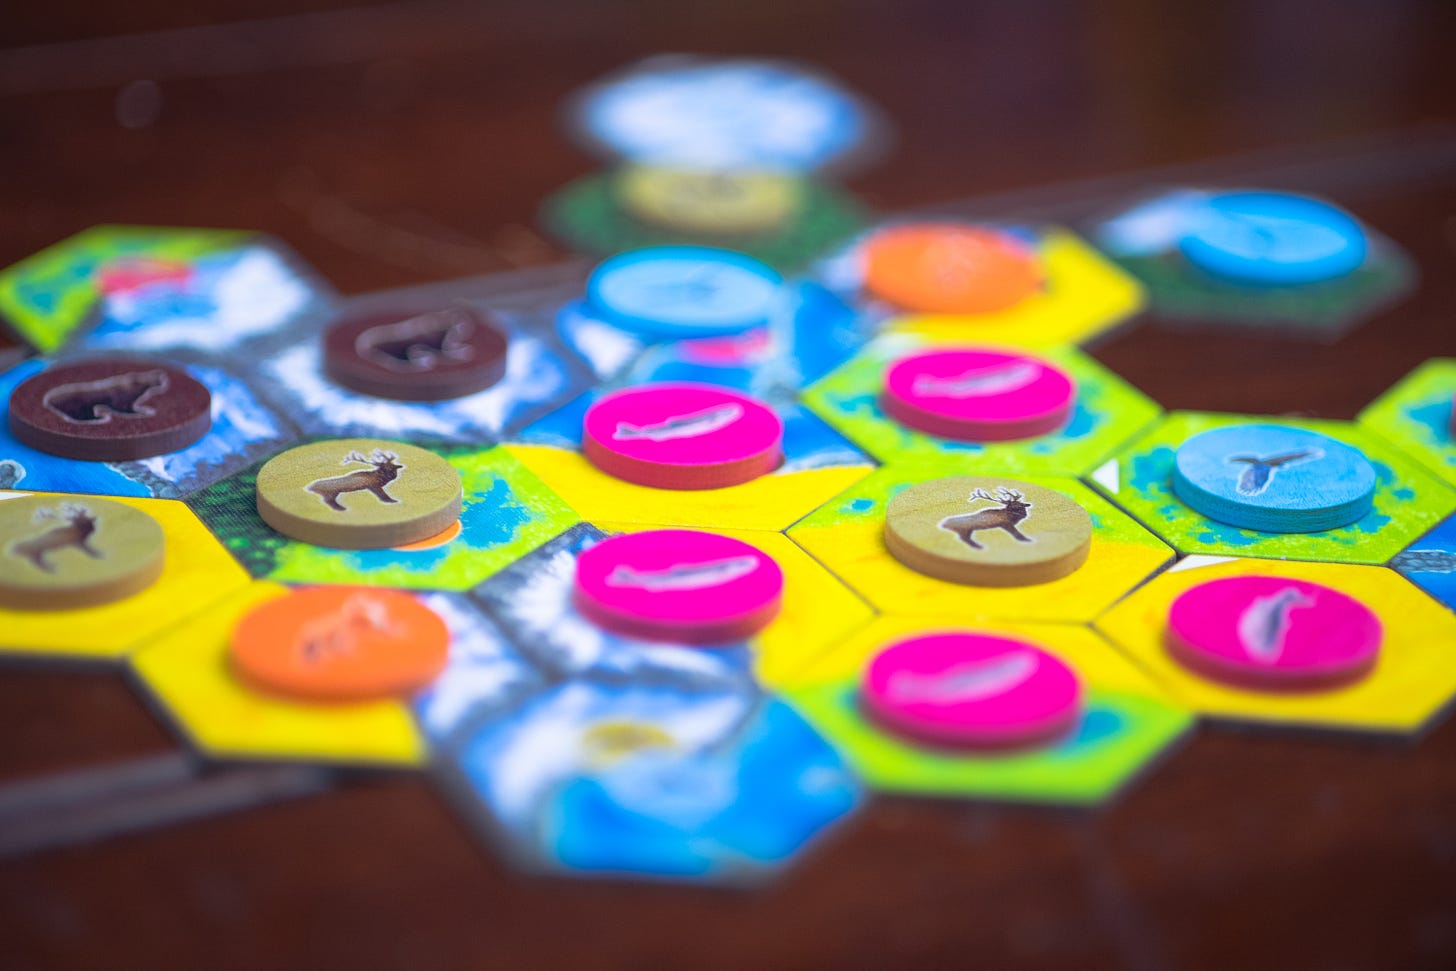 Hexagonal tiles and round animal tokens in a player's map in Cascadia.